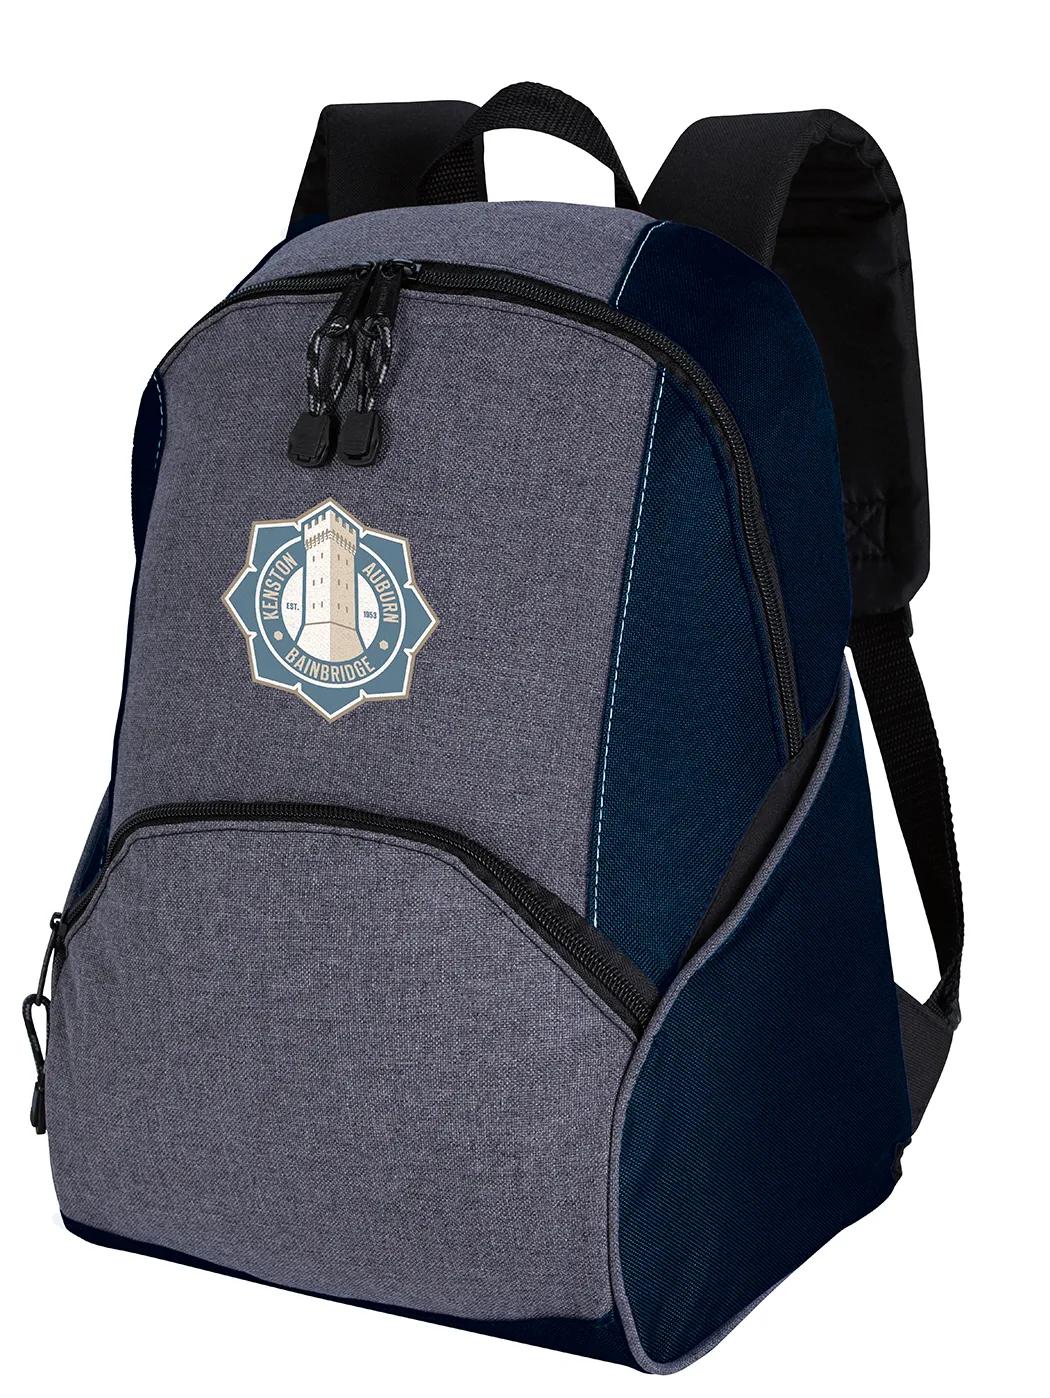 Two-Tone On the Move Backpack 13 of 25